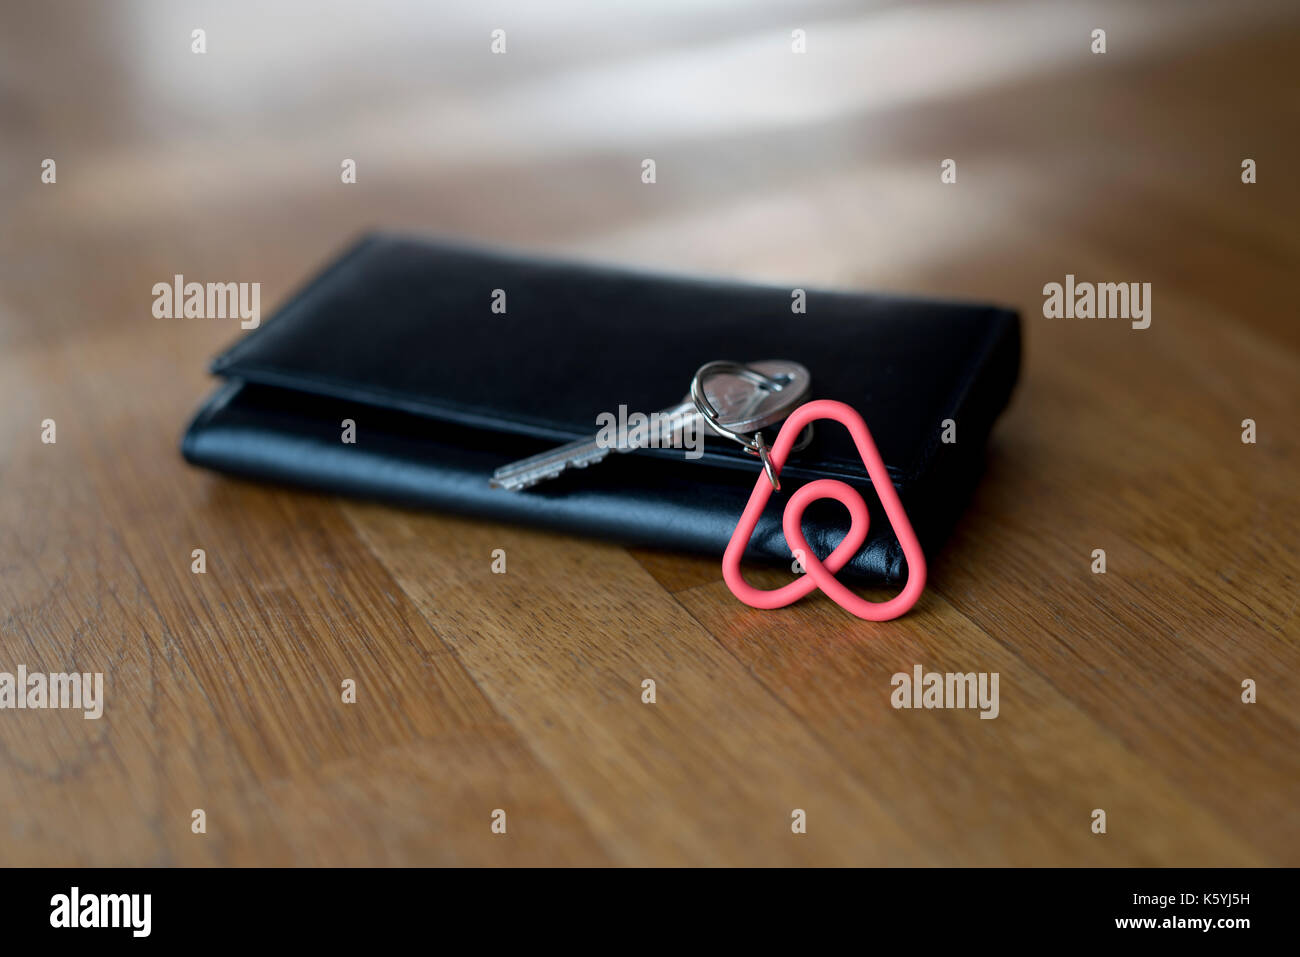 Photos Appartement Airbnb Images Appartement Airbnb Alamy